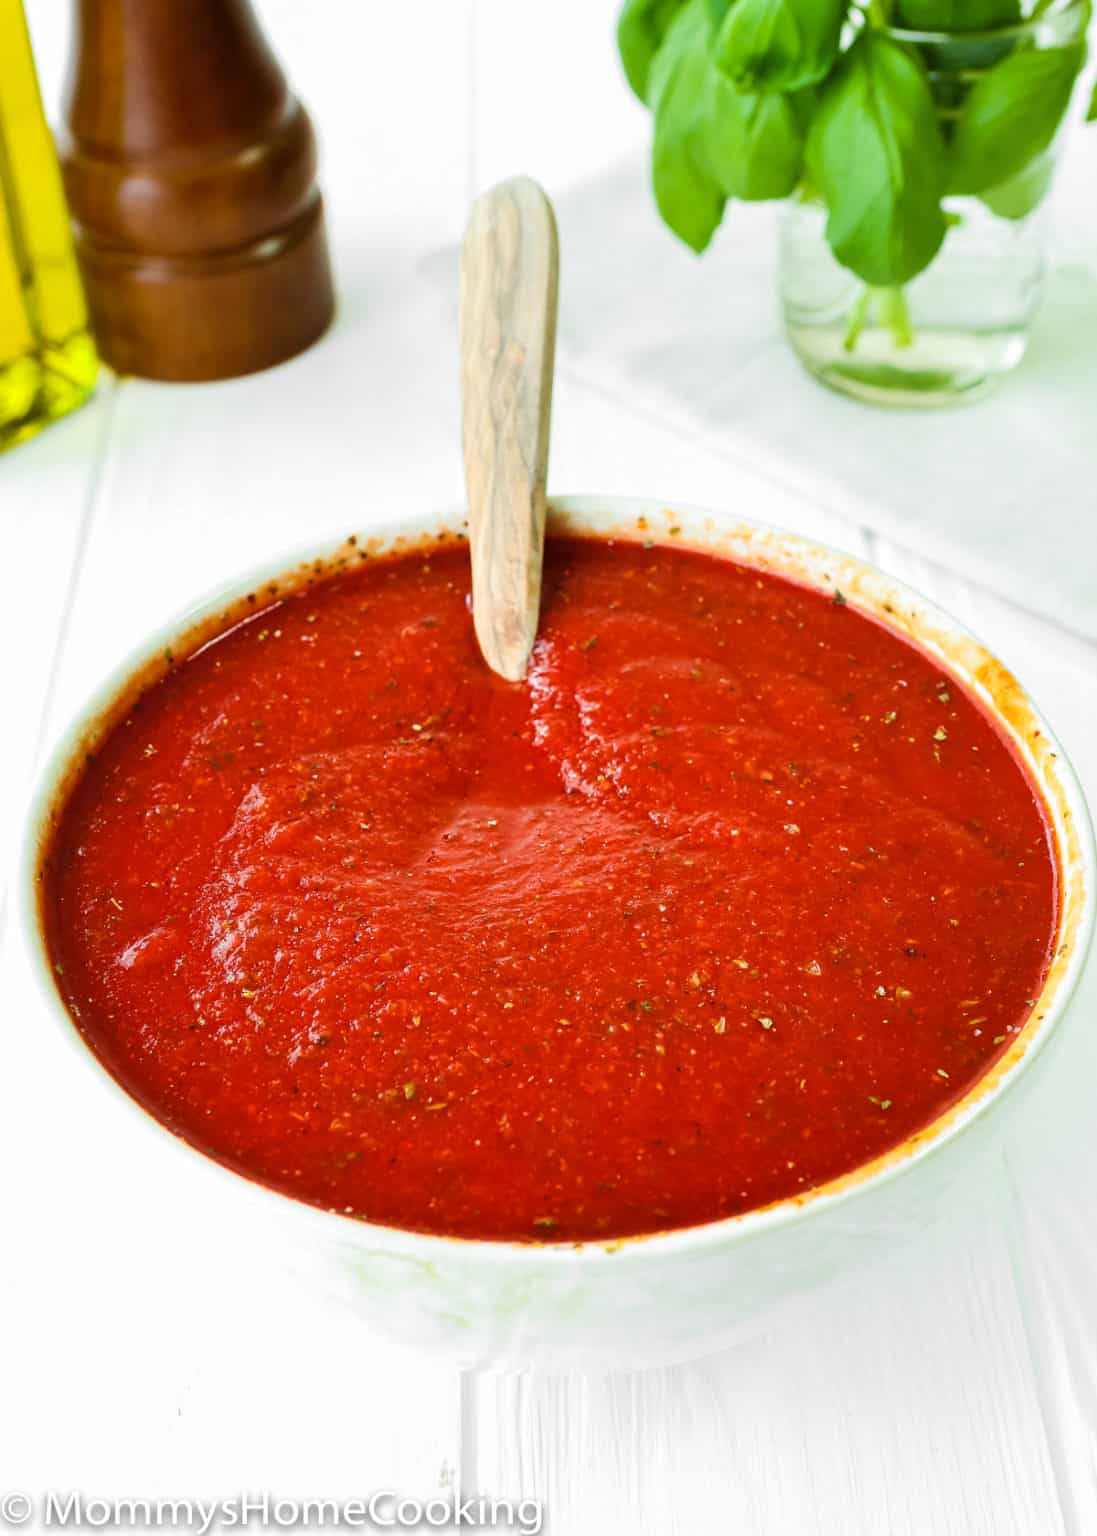 No-Cook Easy Pizza Tomato Sauce (5-min) - Mommy's Home Cooking